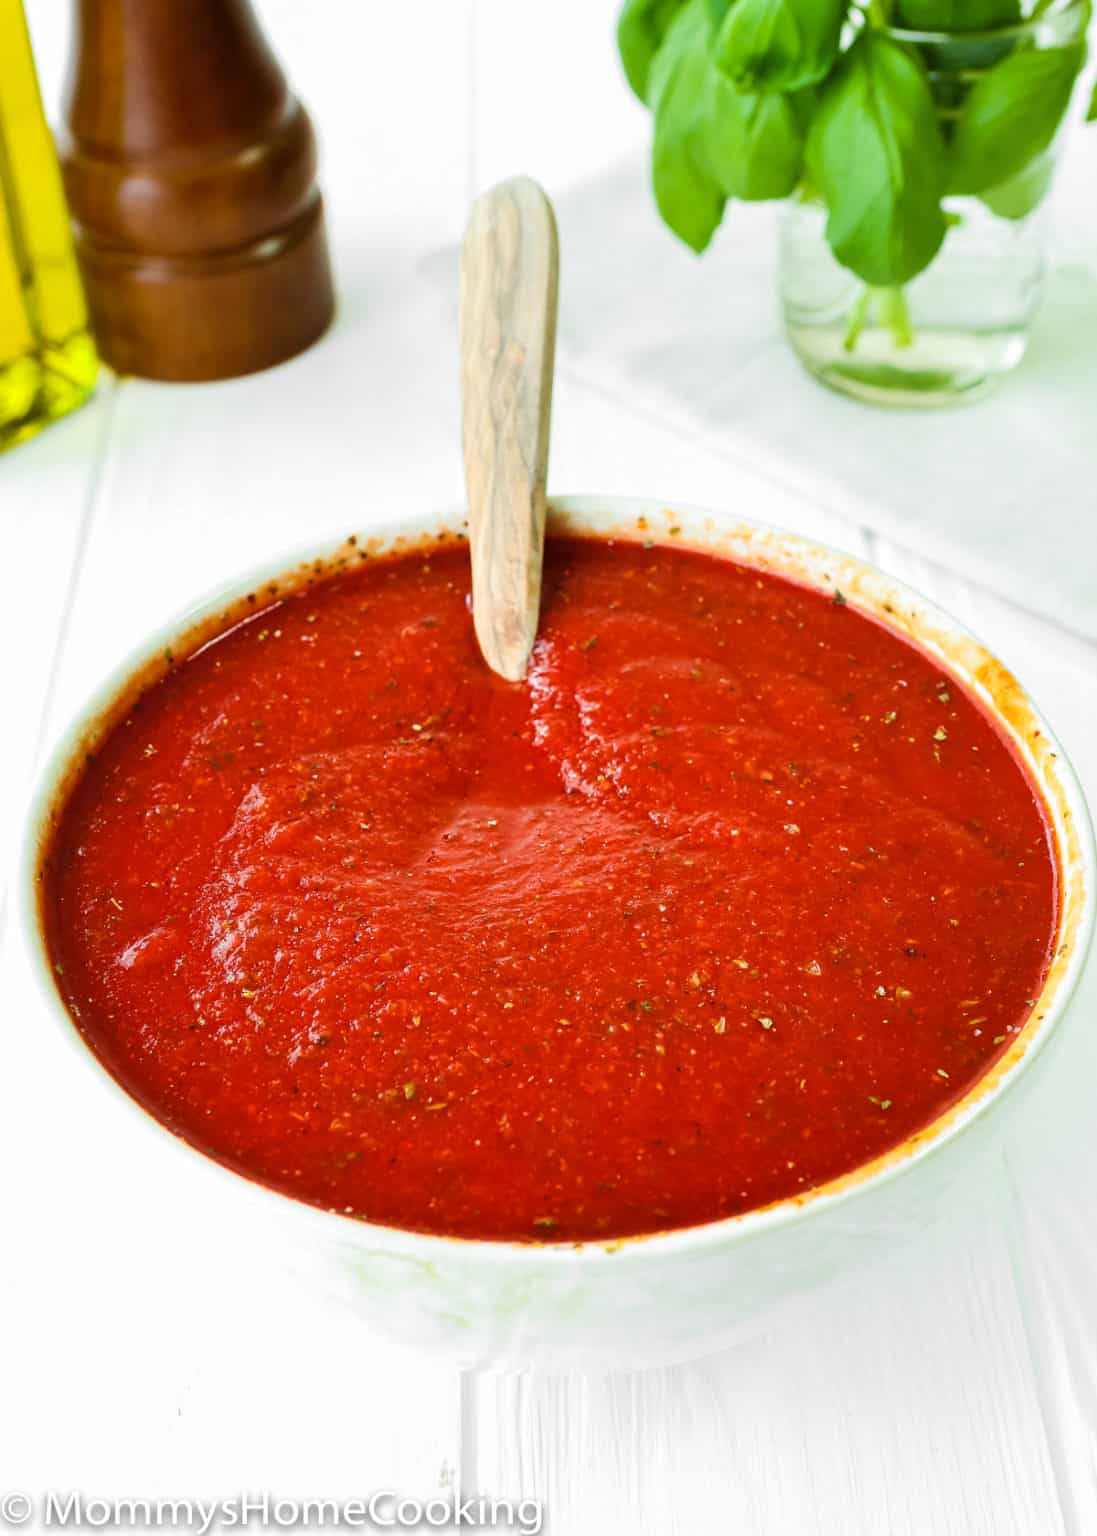 No-Cook Easy Pizza Tomato Sauce (5-min) - Mommy's Home Cooking